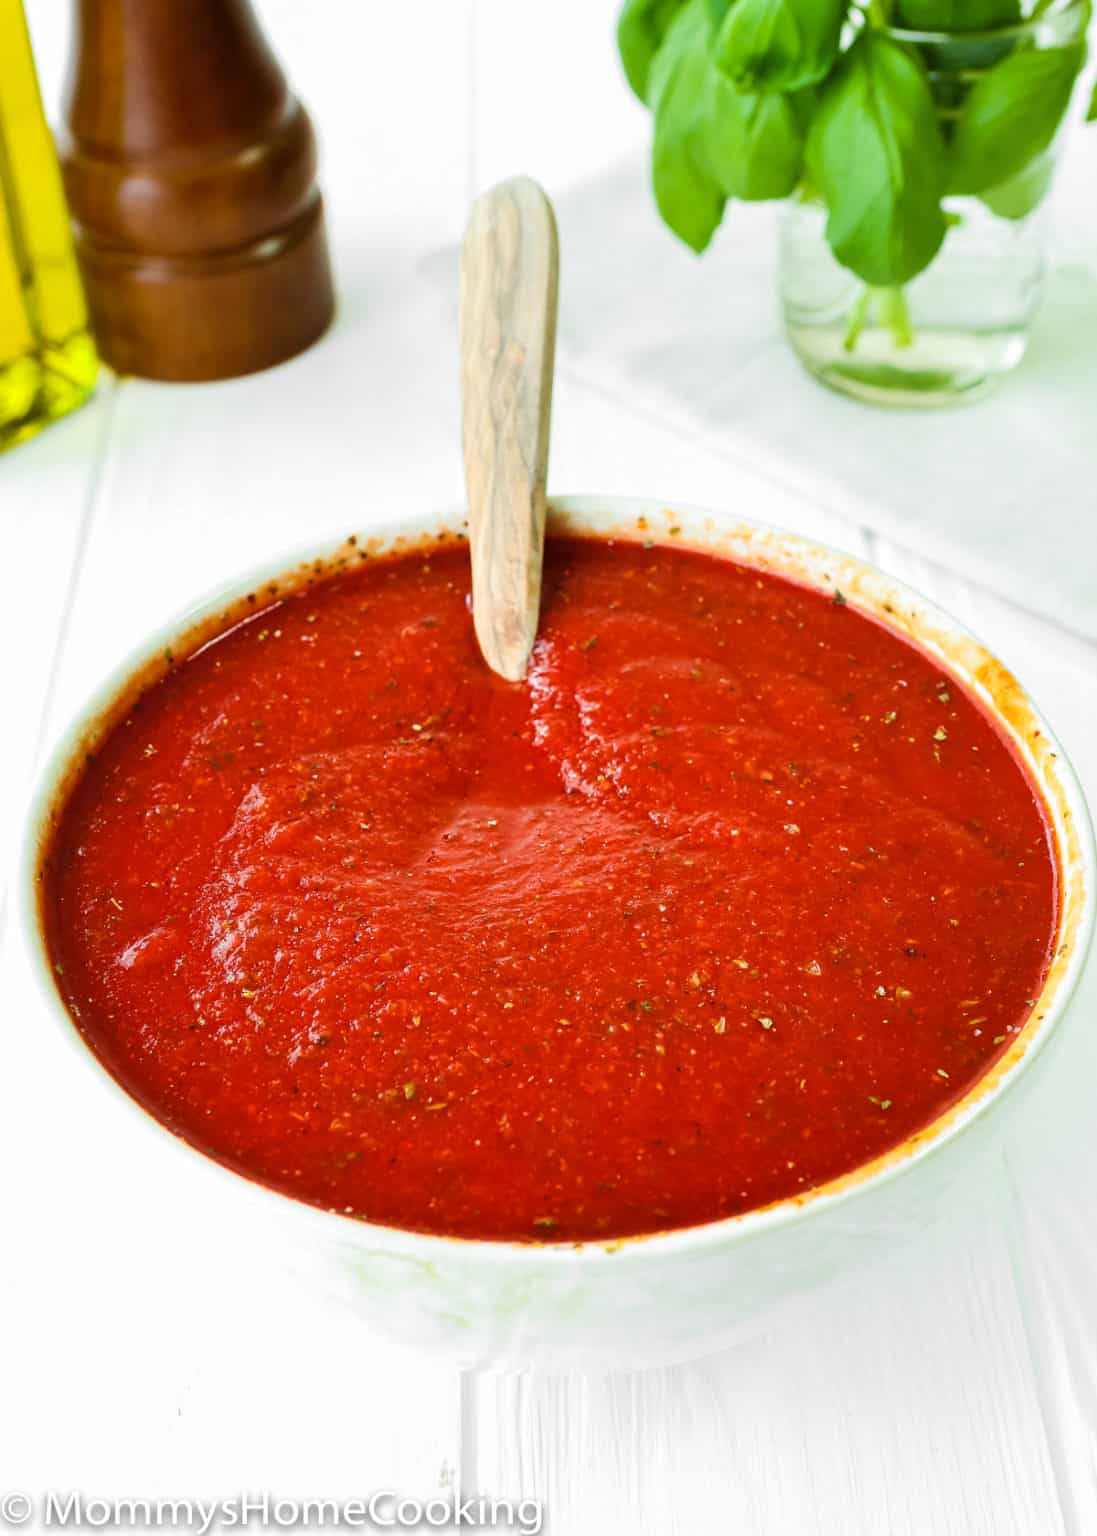 No-Cook Easy Pizza Tomato Sauce (5-min) - Mommy's Home Cooking